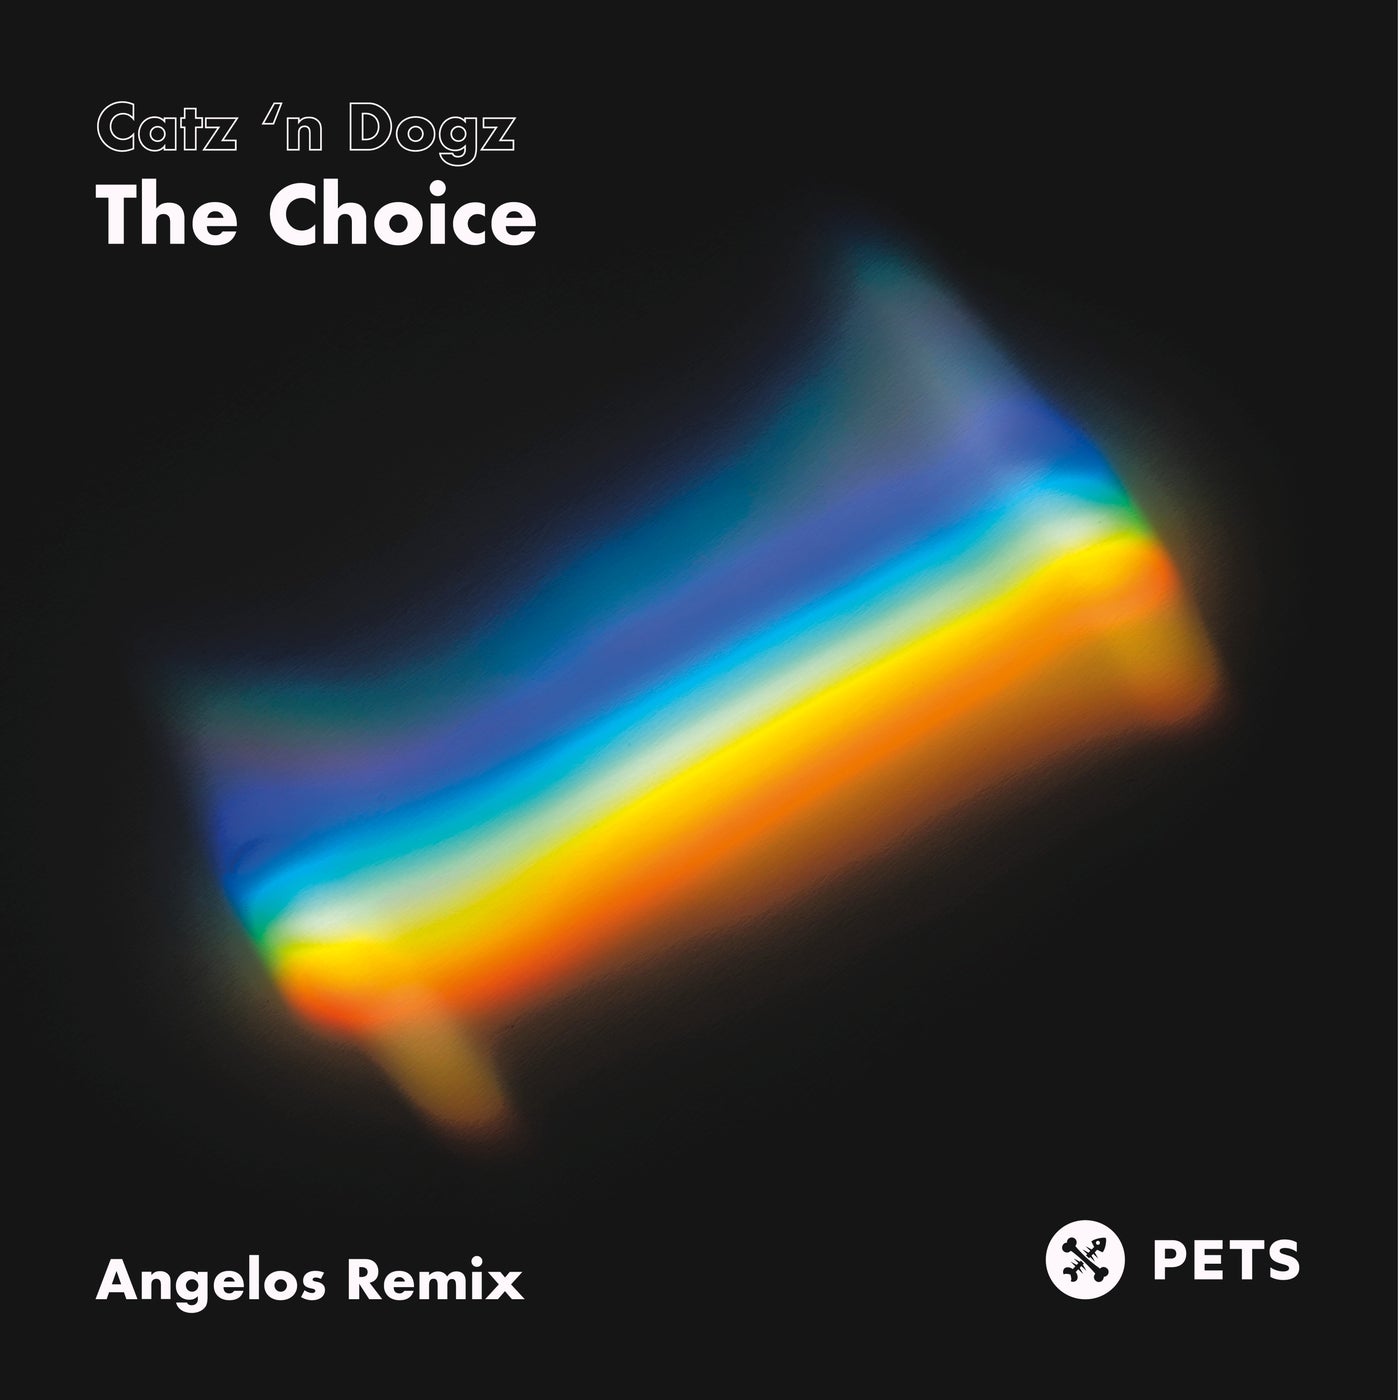 image cover: Catz 'n Dogz - The Choice (Angelos Remix) on Pets Recordings